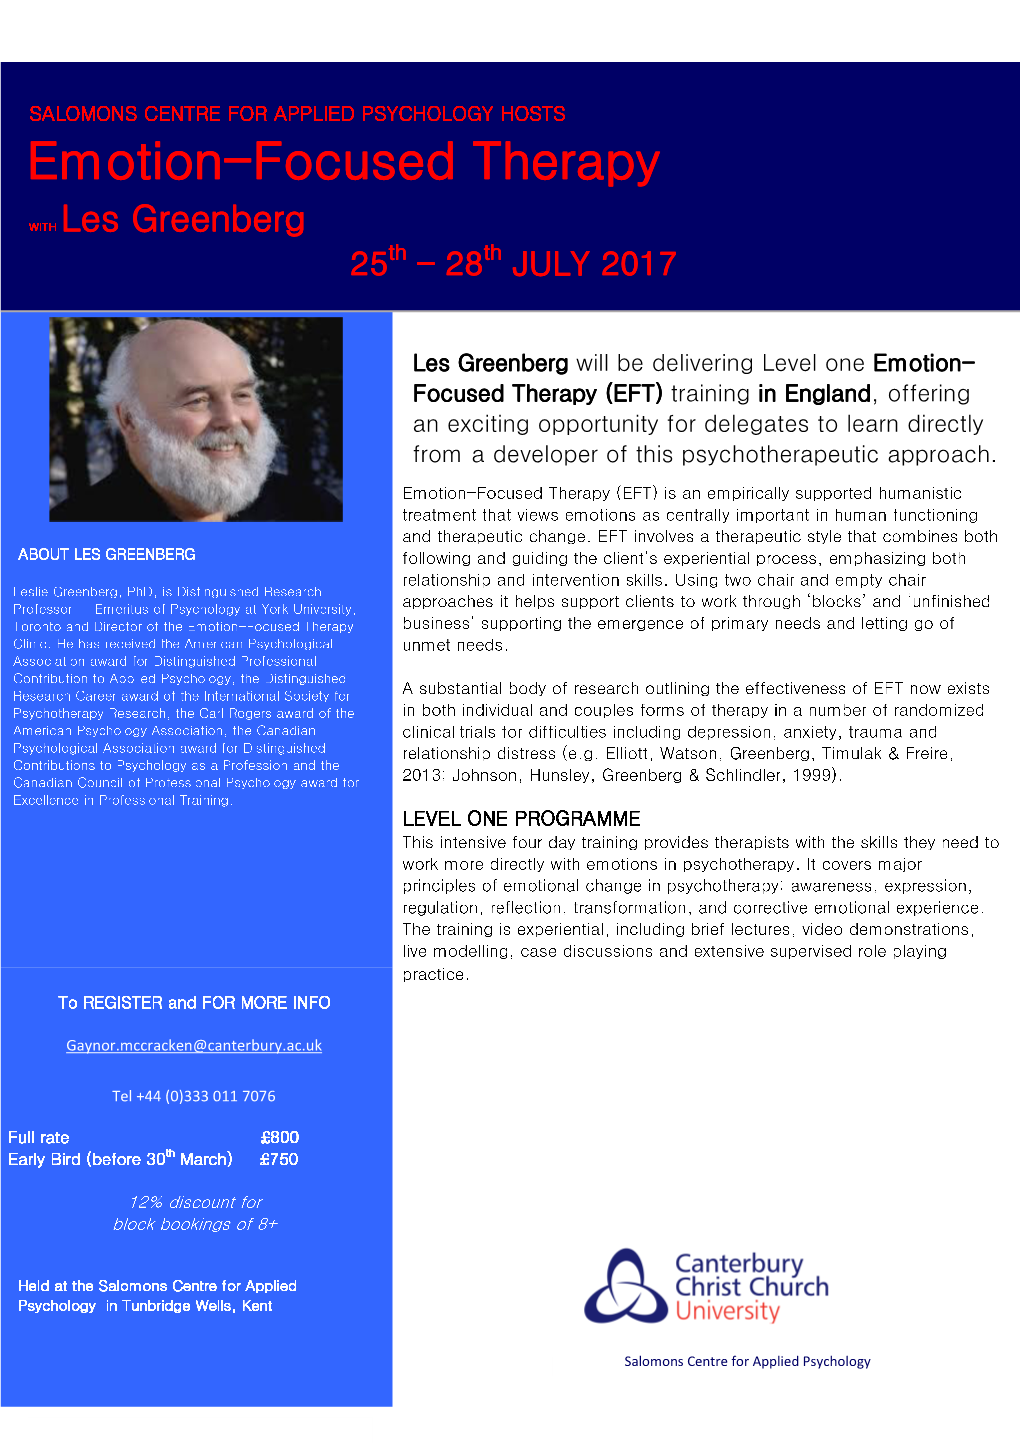 International Society for Emotion Focused Therapy